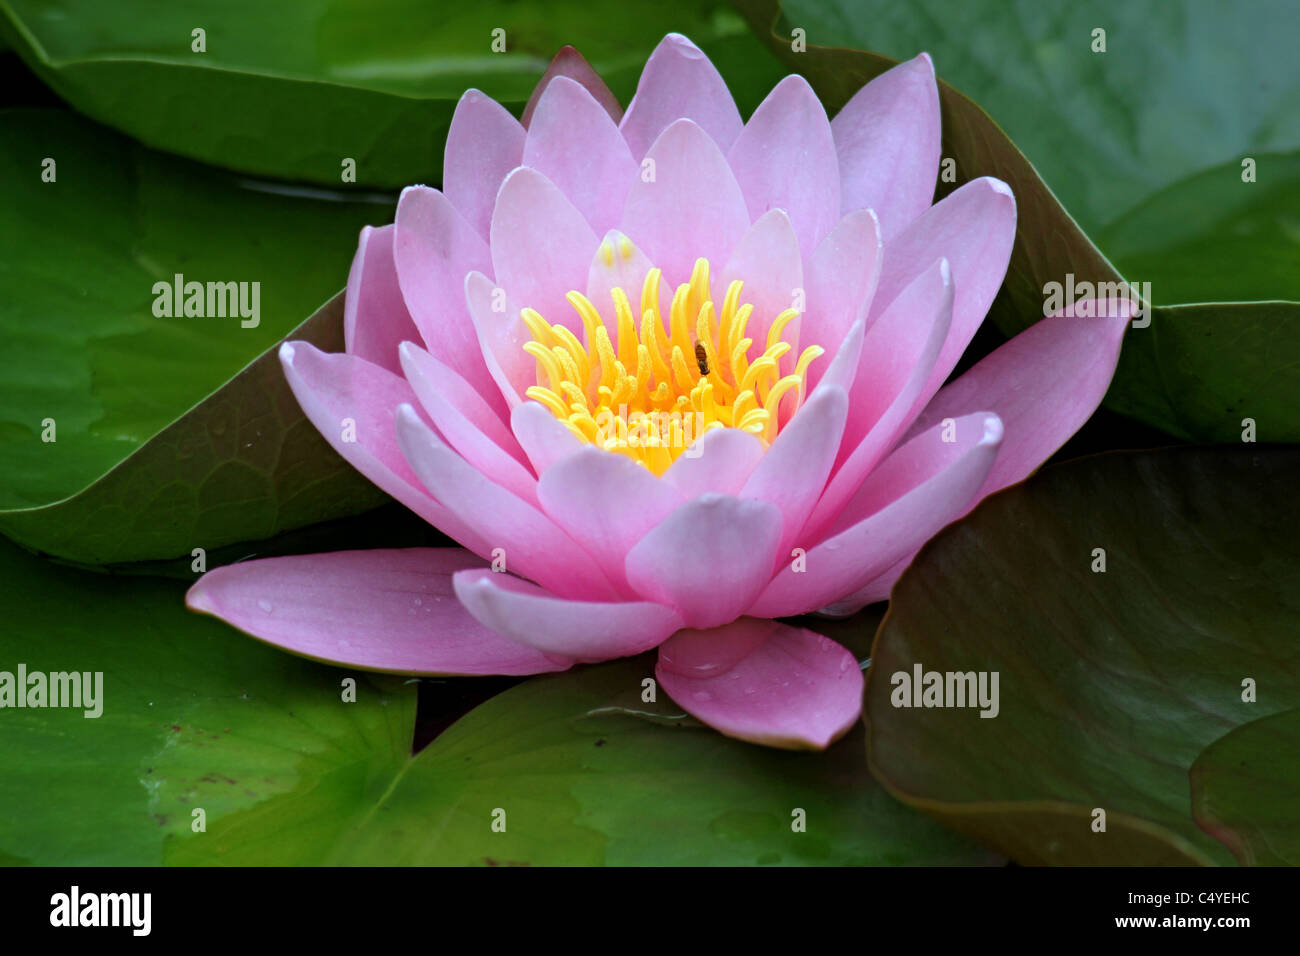 Water lily in bloom Stock Photo